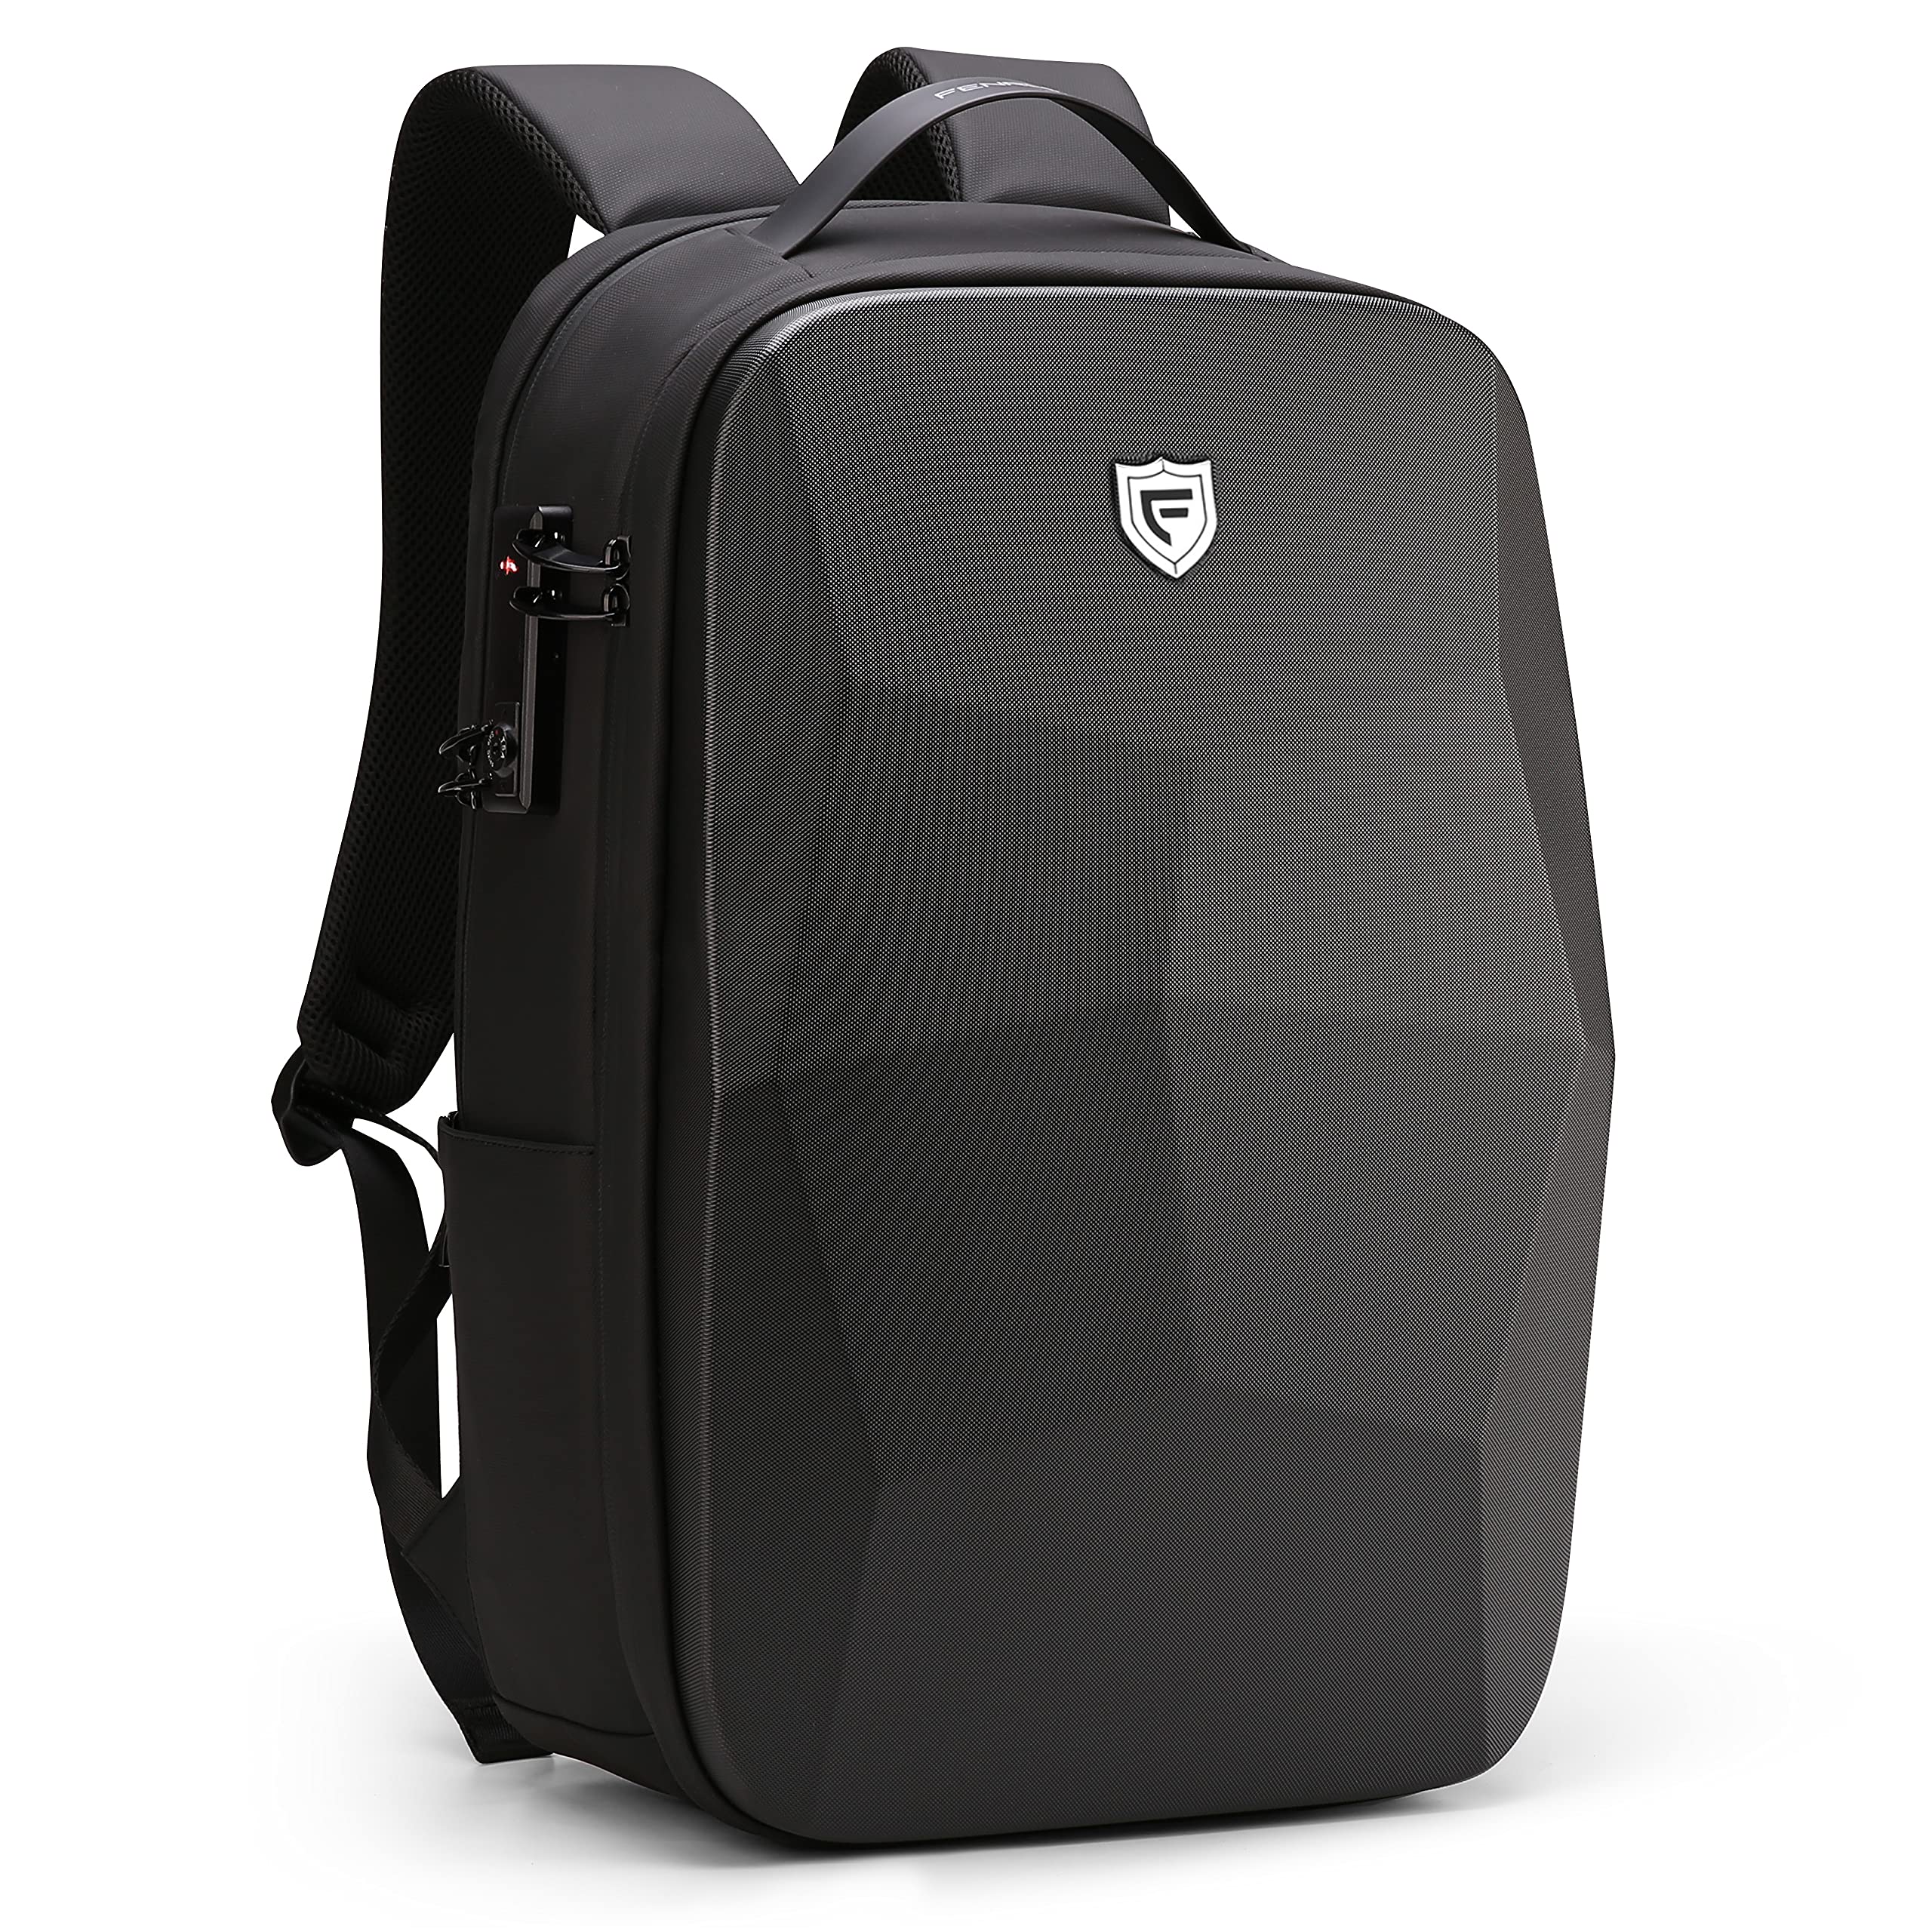 Matein Hard Shell Laptop Backpack